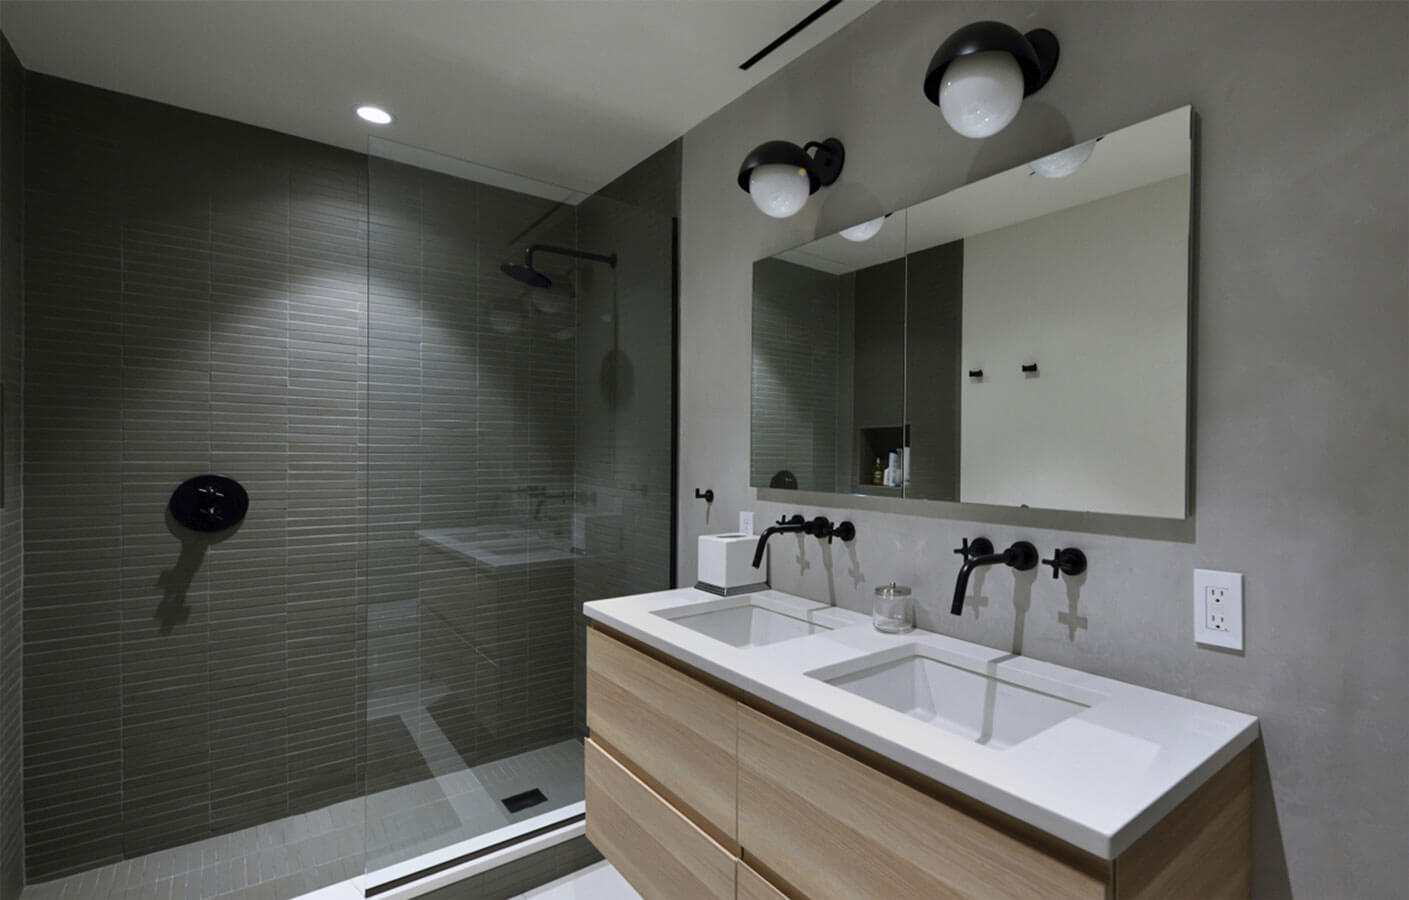 Bathroom Renovation Tips for a Stylish and Functional Space